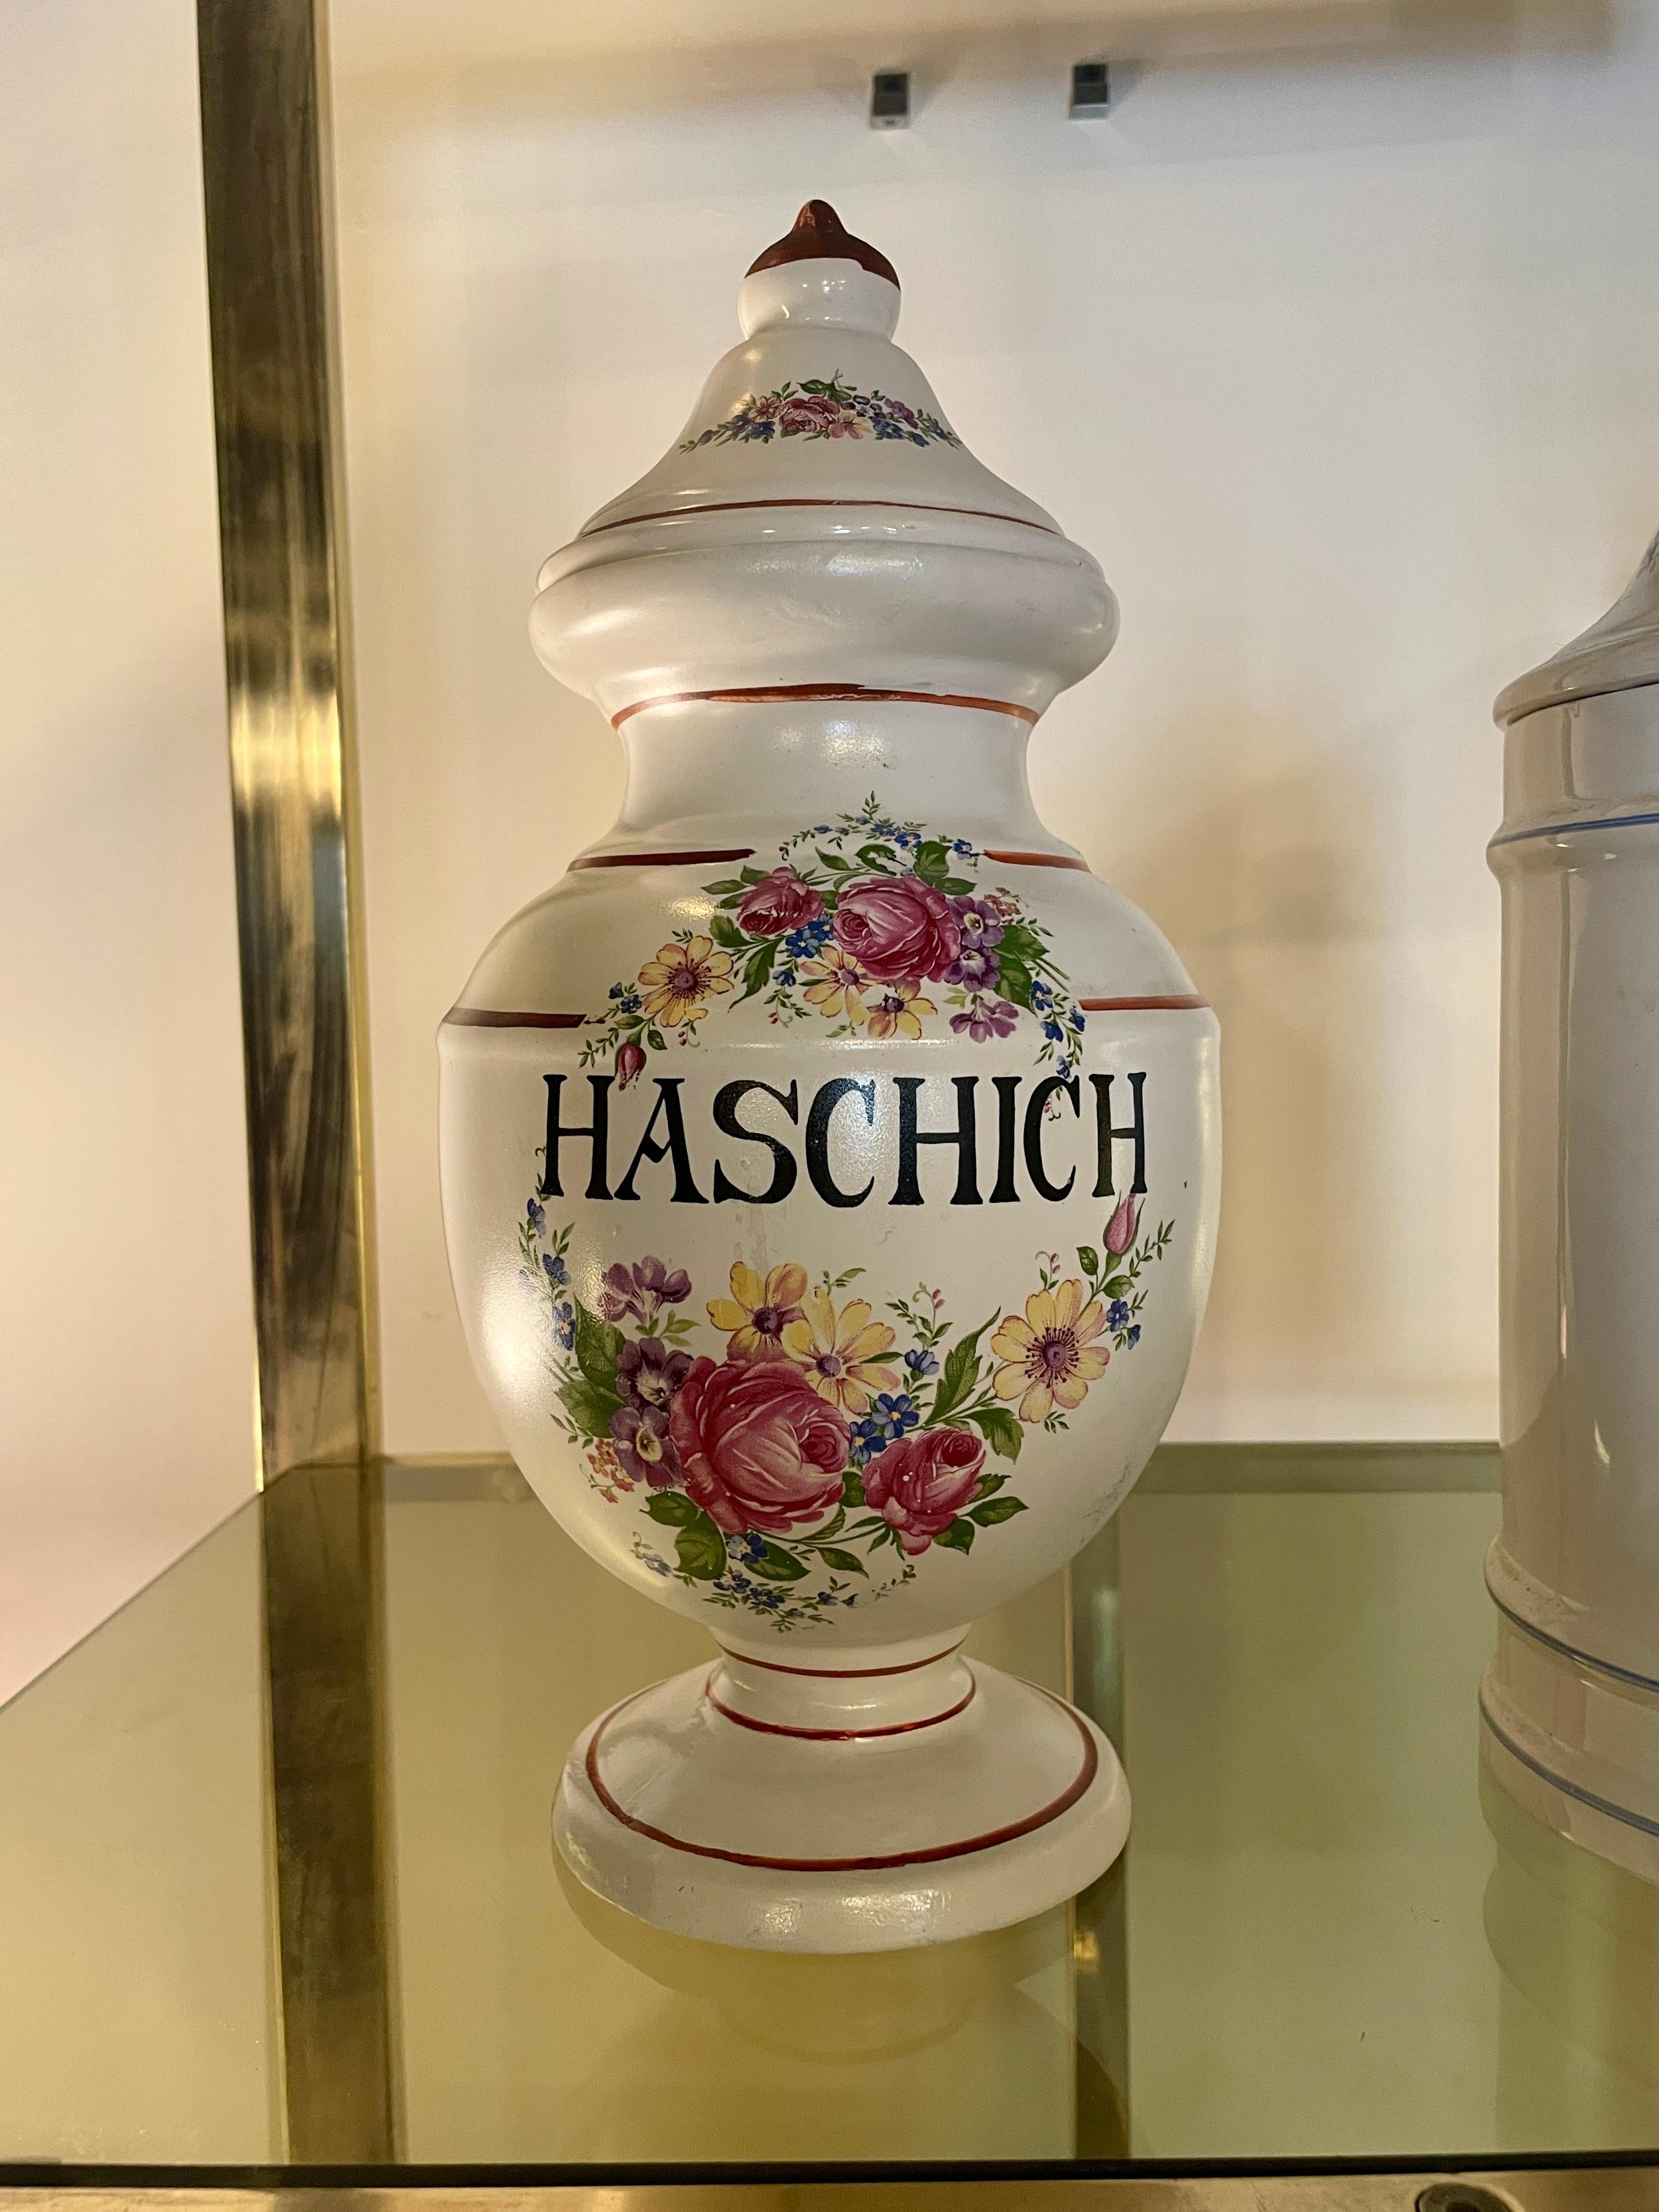 French 
« Haschich » Apothecary Jar. Very big.
1900s. France
Porcelain of Limoges.
Perfect condition.
Drug. Opium. Cocaine. Weed.
Mid-Century Modern. Vintage furniture. Italian design. 1970s. Rosenthal. Germany. Willy Rizzo. Loewy.
In the style of